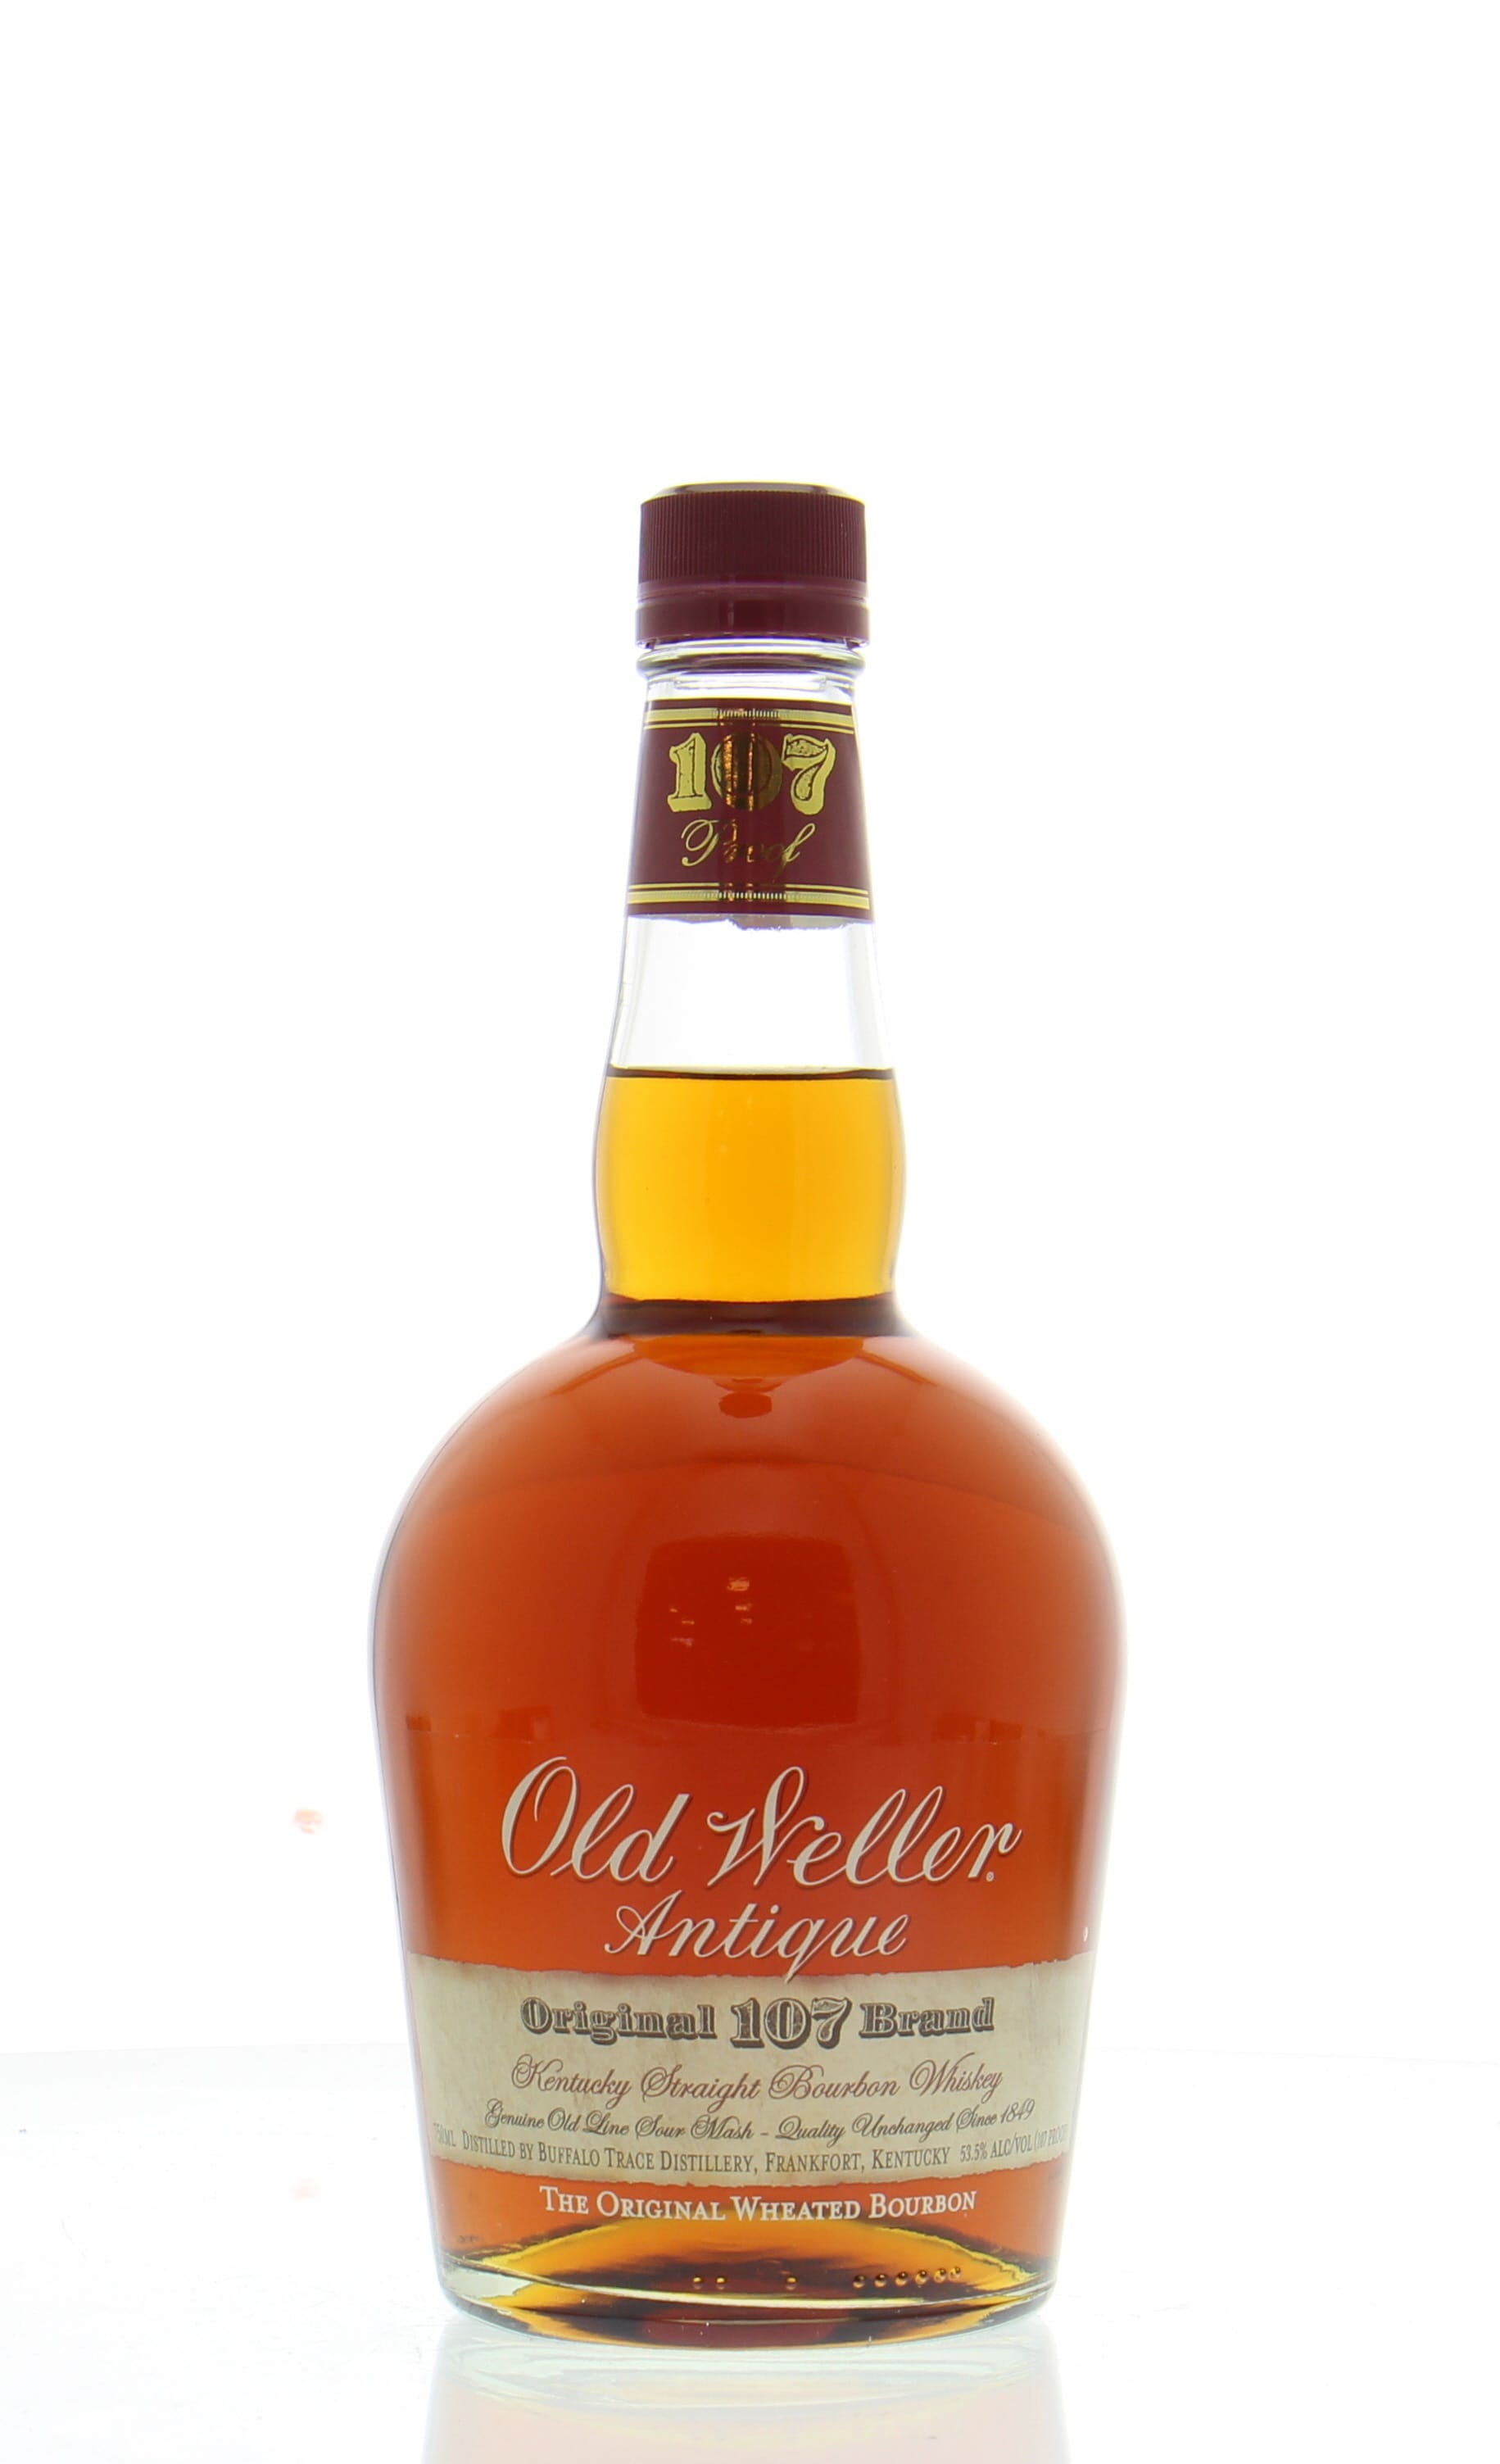 Buffalo Trace - Old Weller Antique Original 107 Brand 53.5% NV Perfect